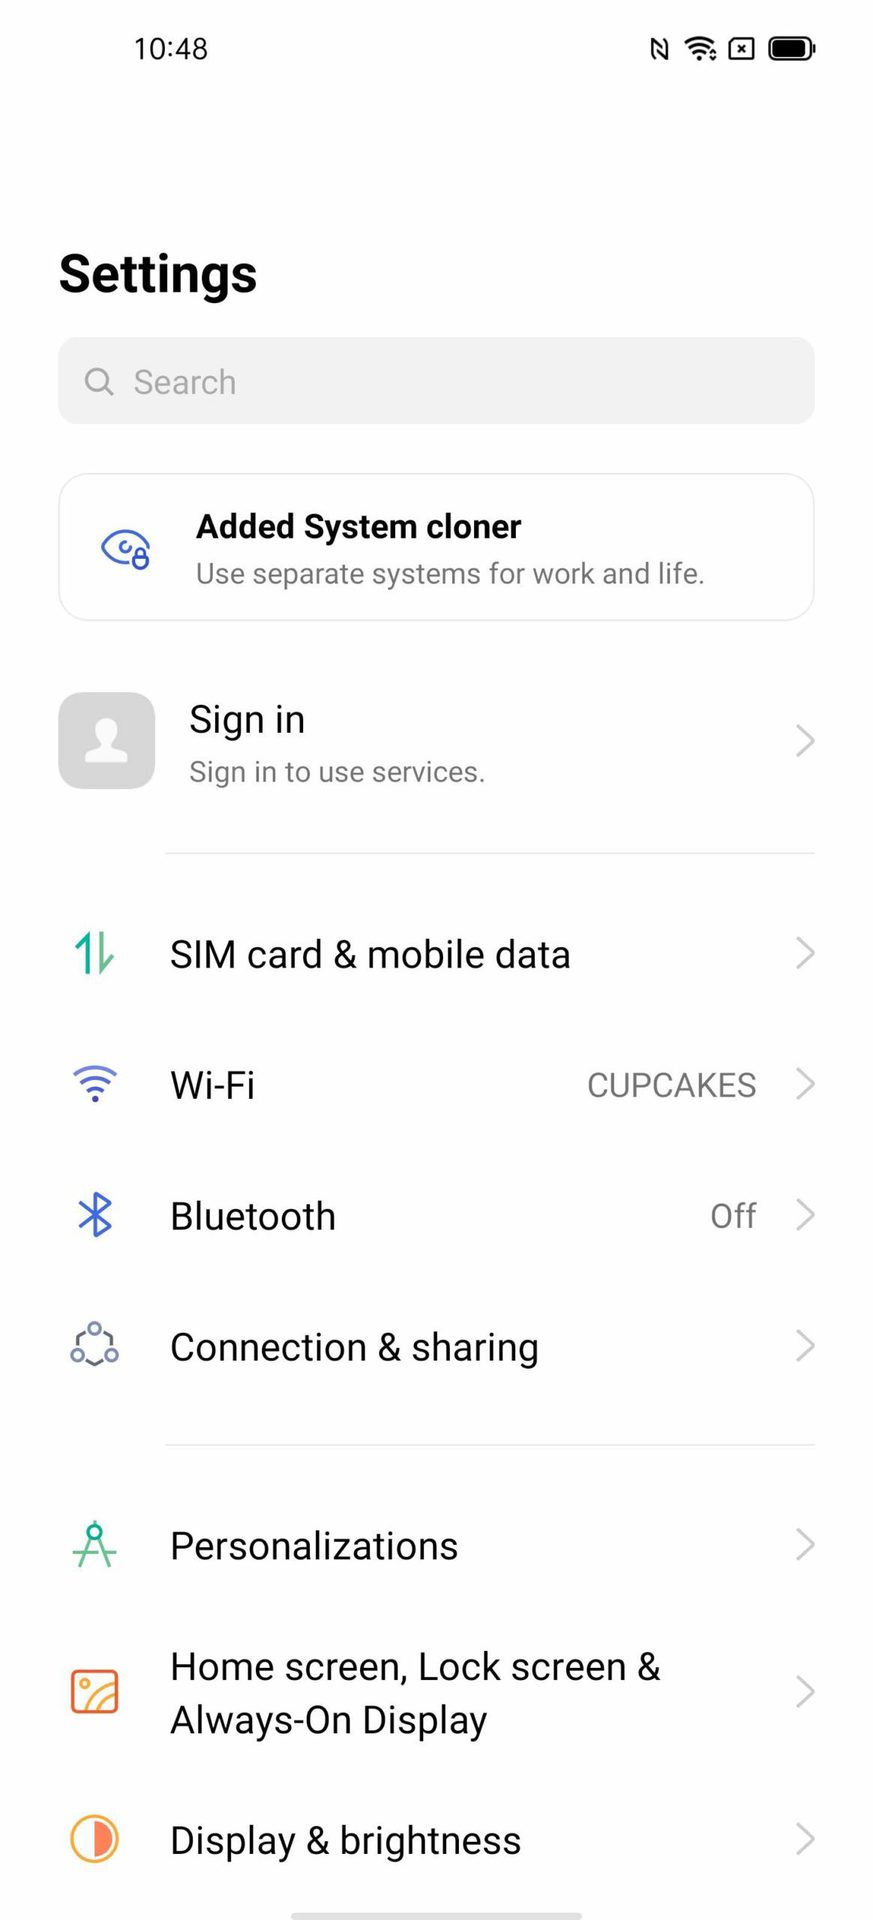 Oppo Color OS 11 Screenshot 4 showing Settings